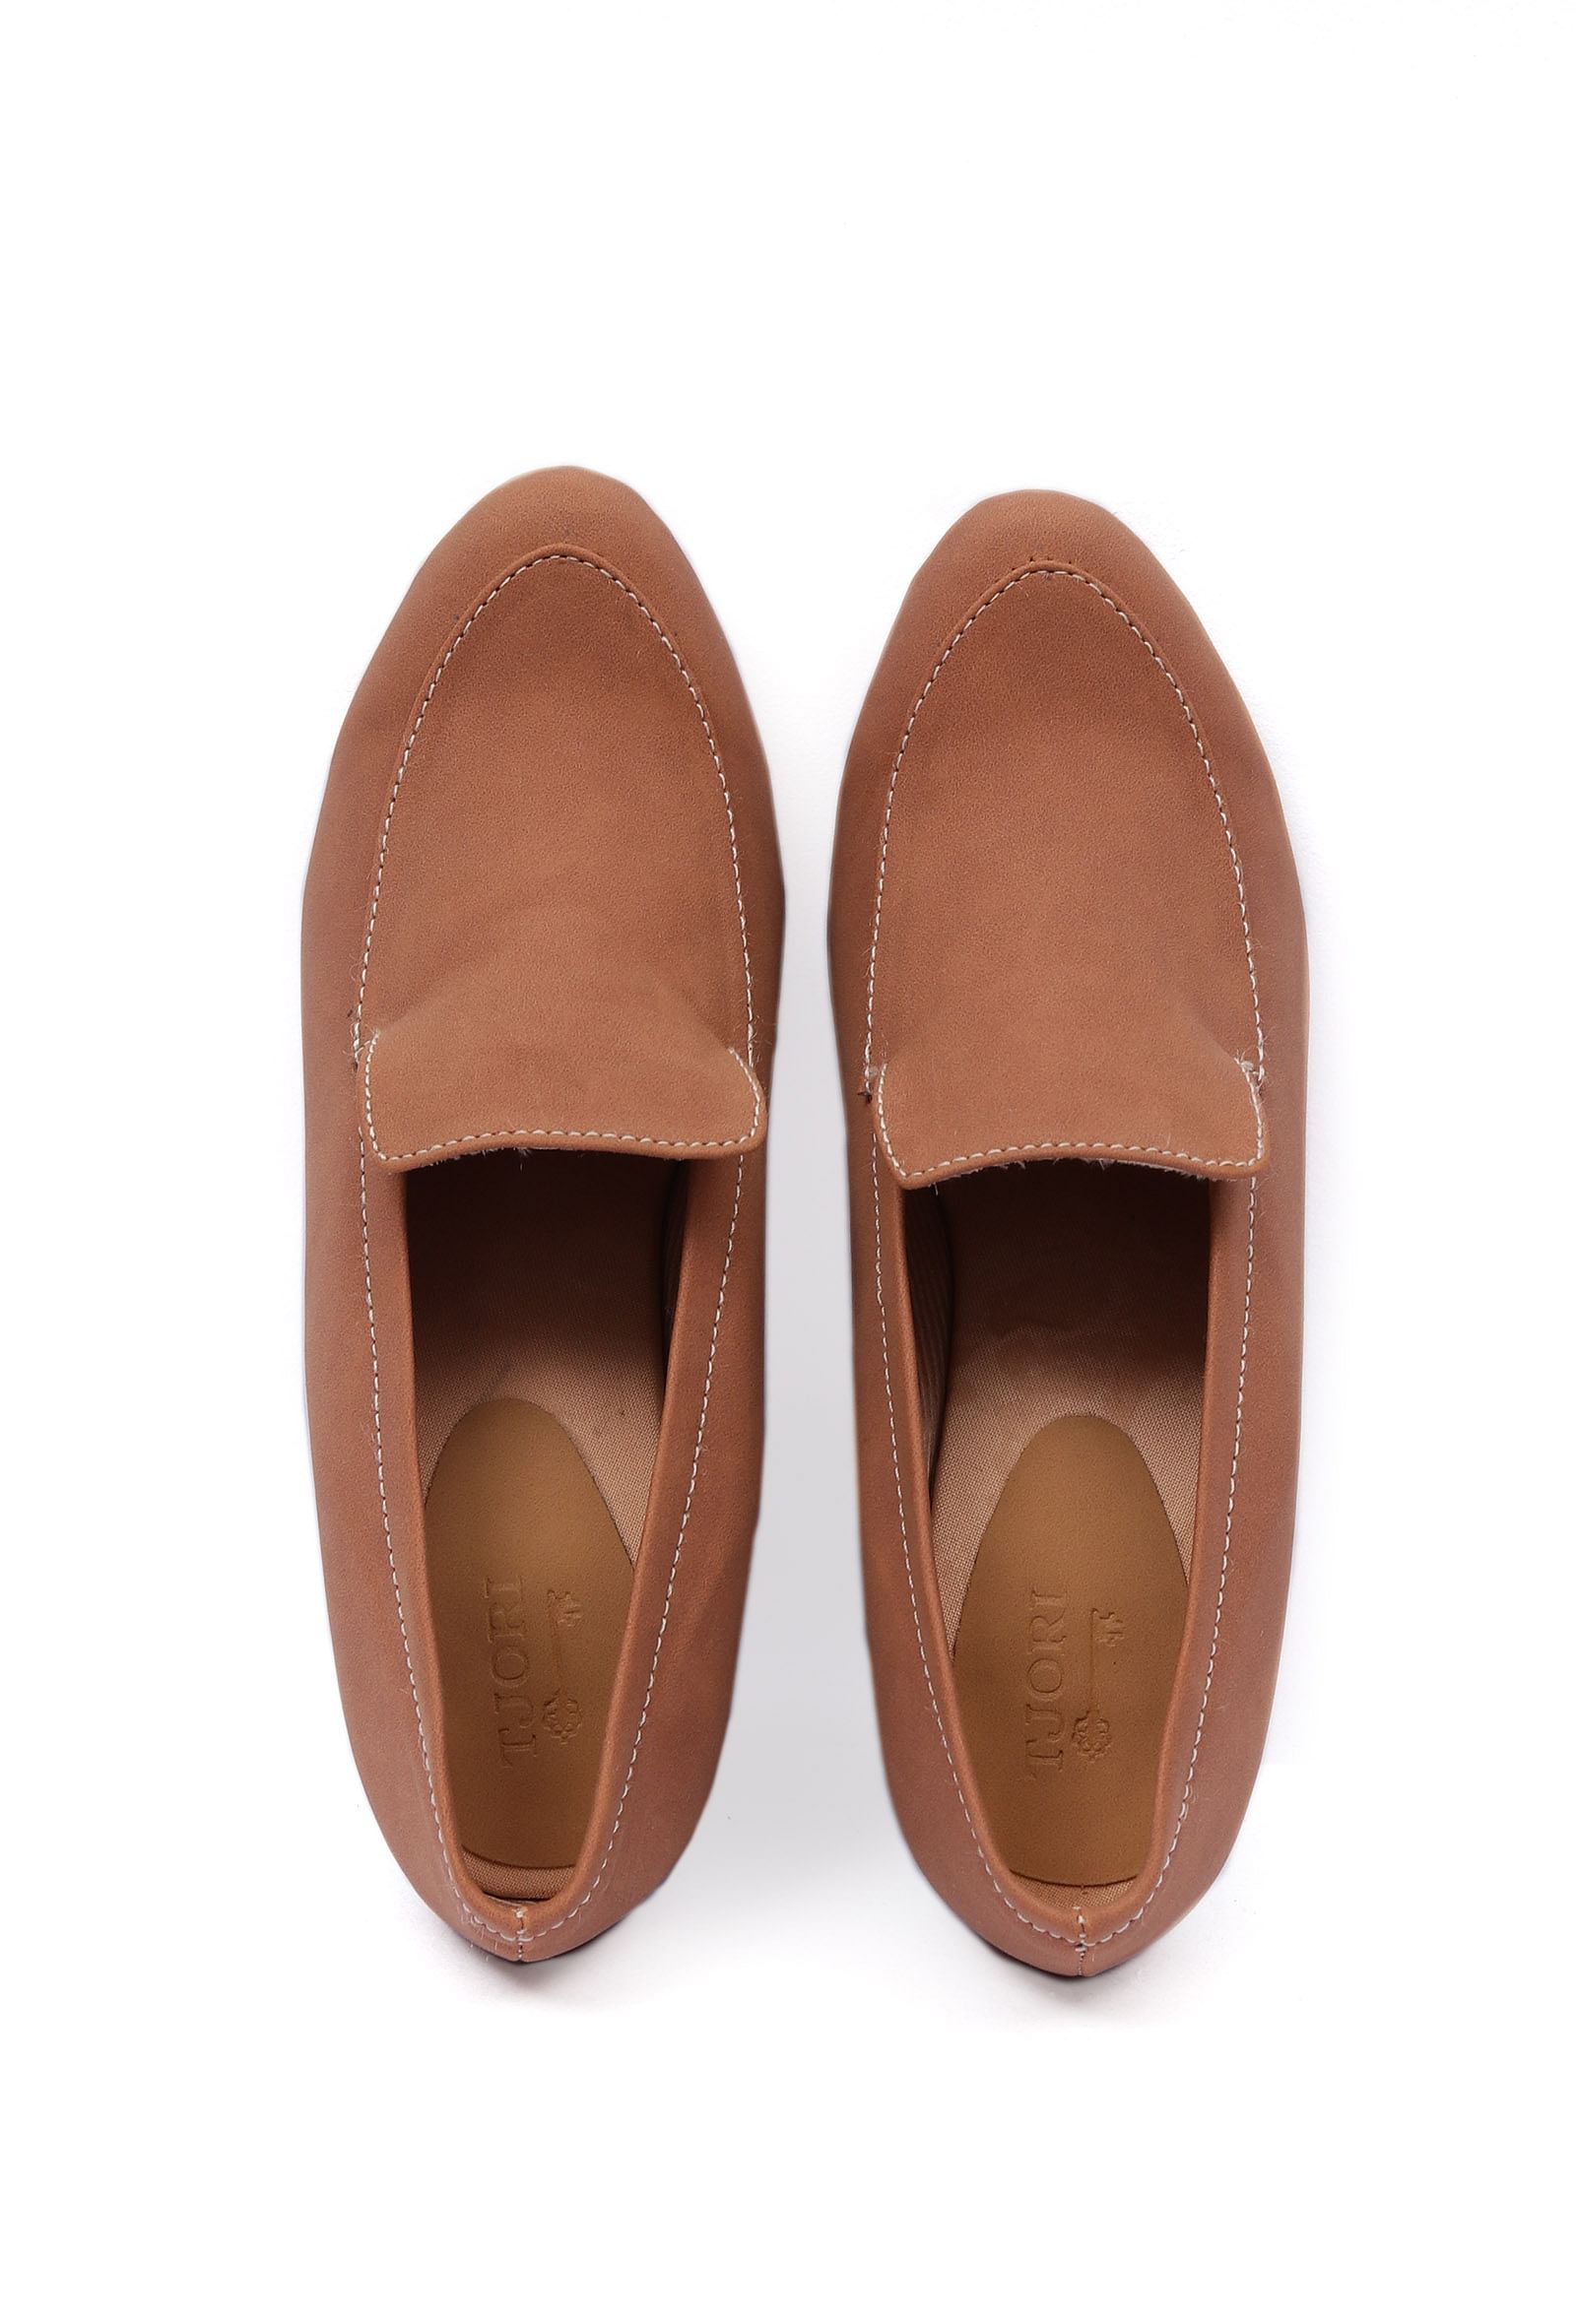 Sienna Brown Cruelty-Free Leather loafers With Carved Heels